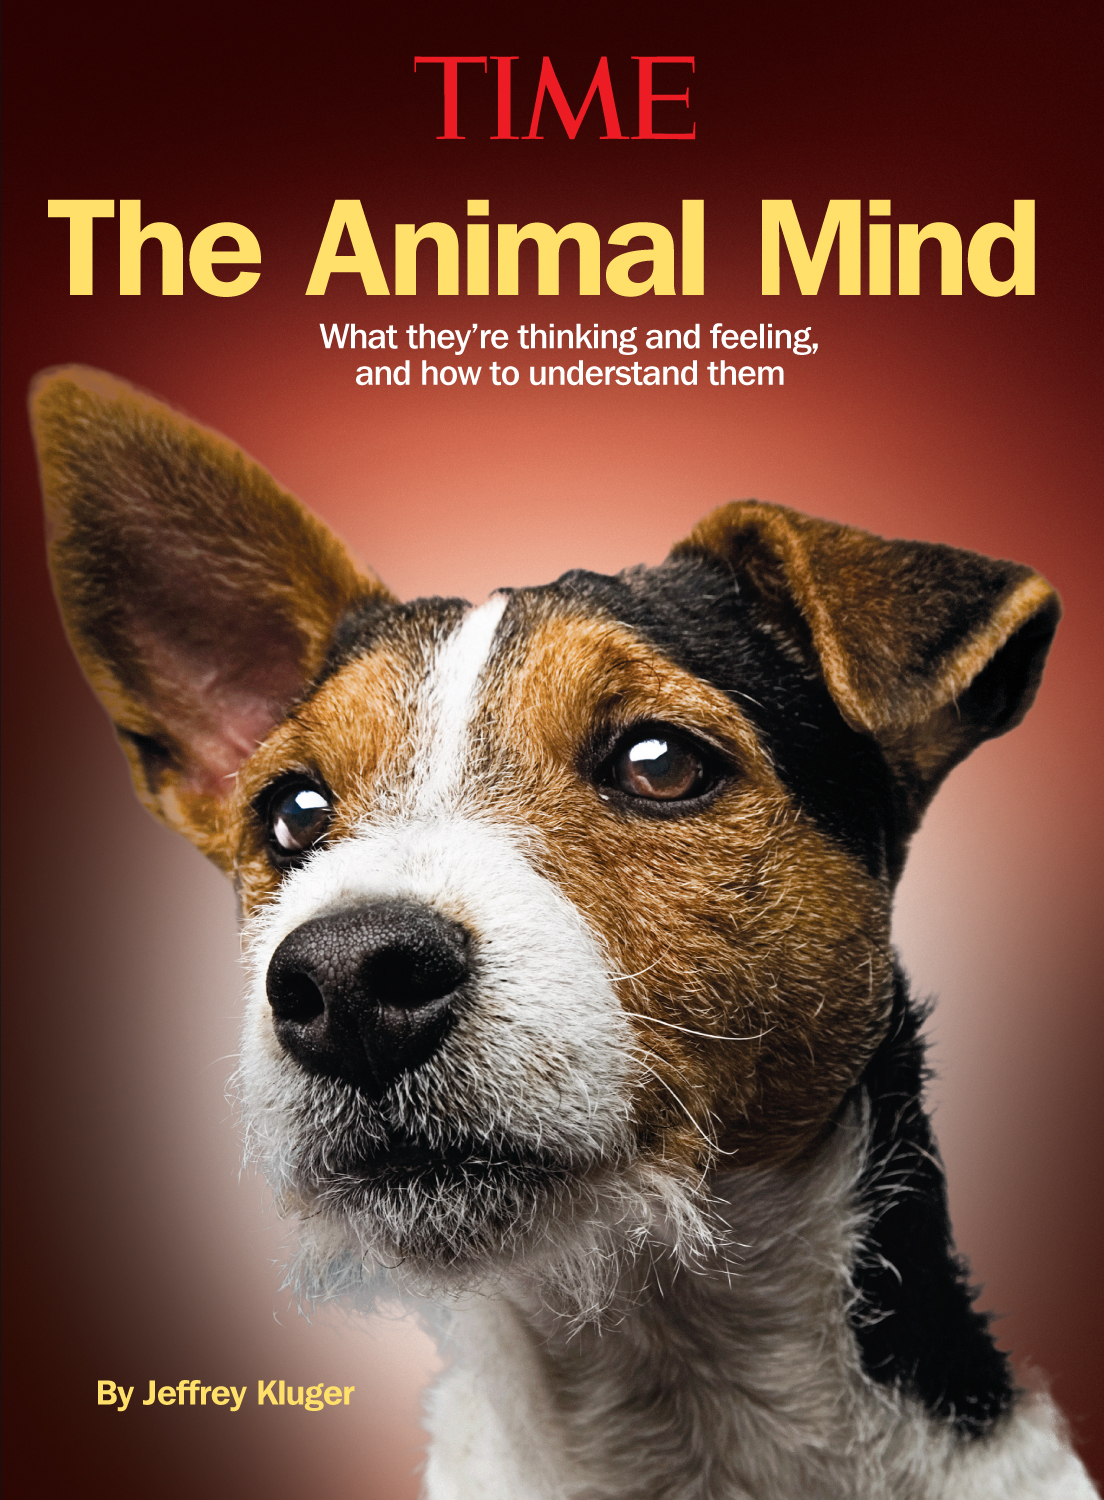 Animal Minds: What Are They Thinking? | Time